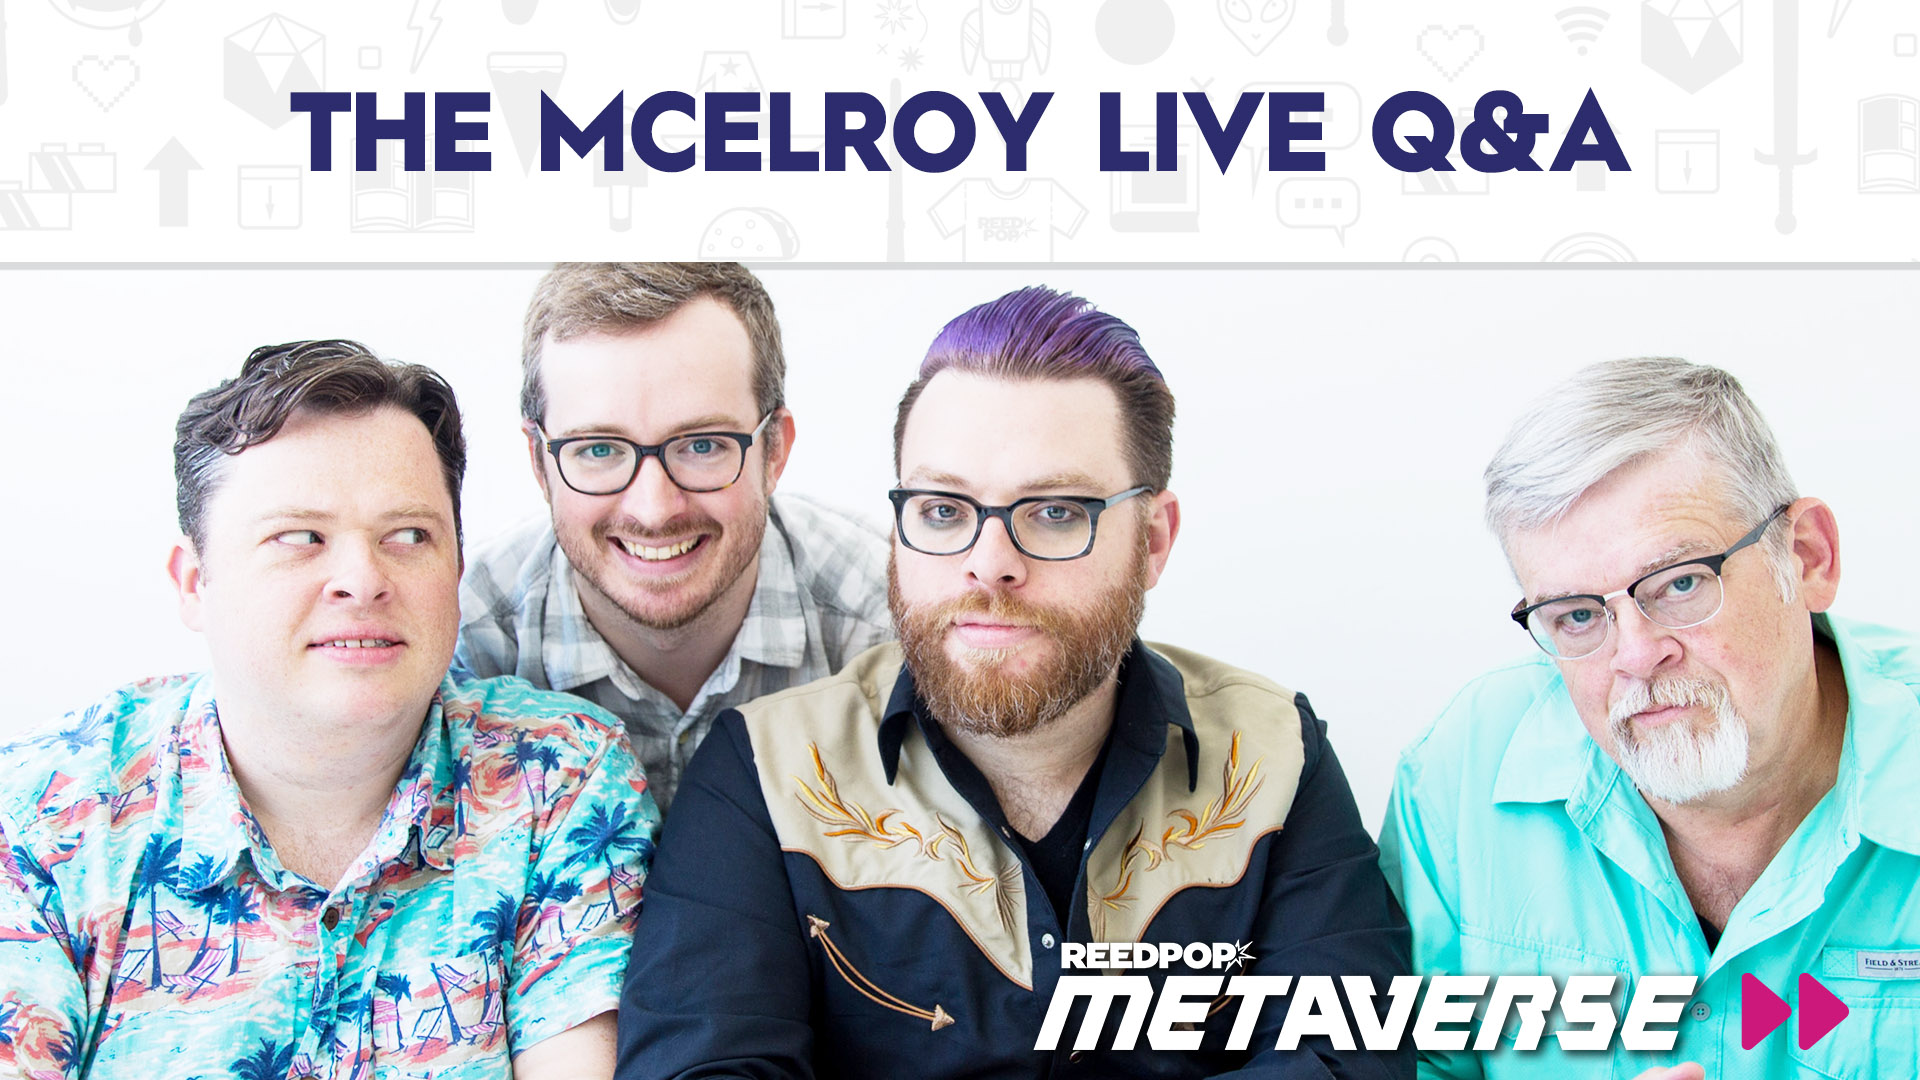 Image for The McElroy Live Q&A - June 11 at 6 PM PST / 9 PM EST / 2 AM BST